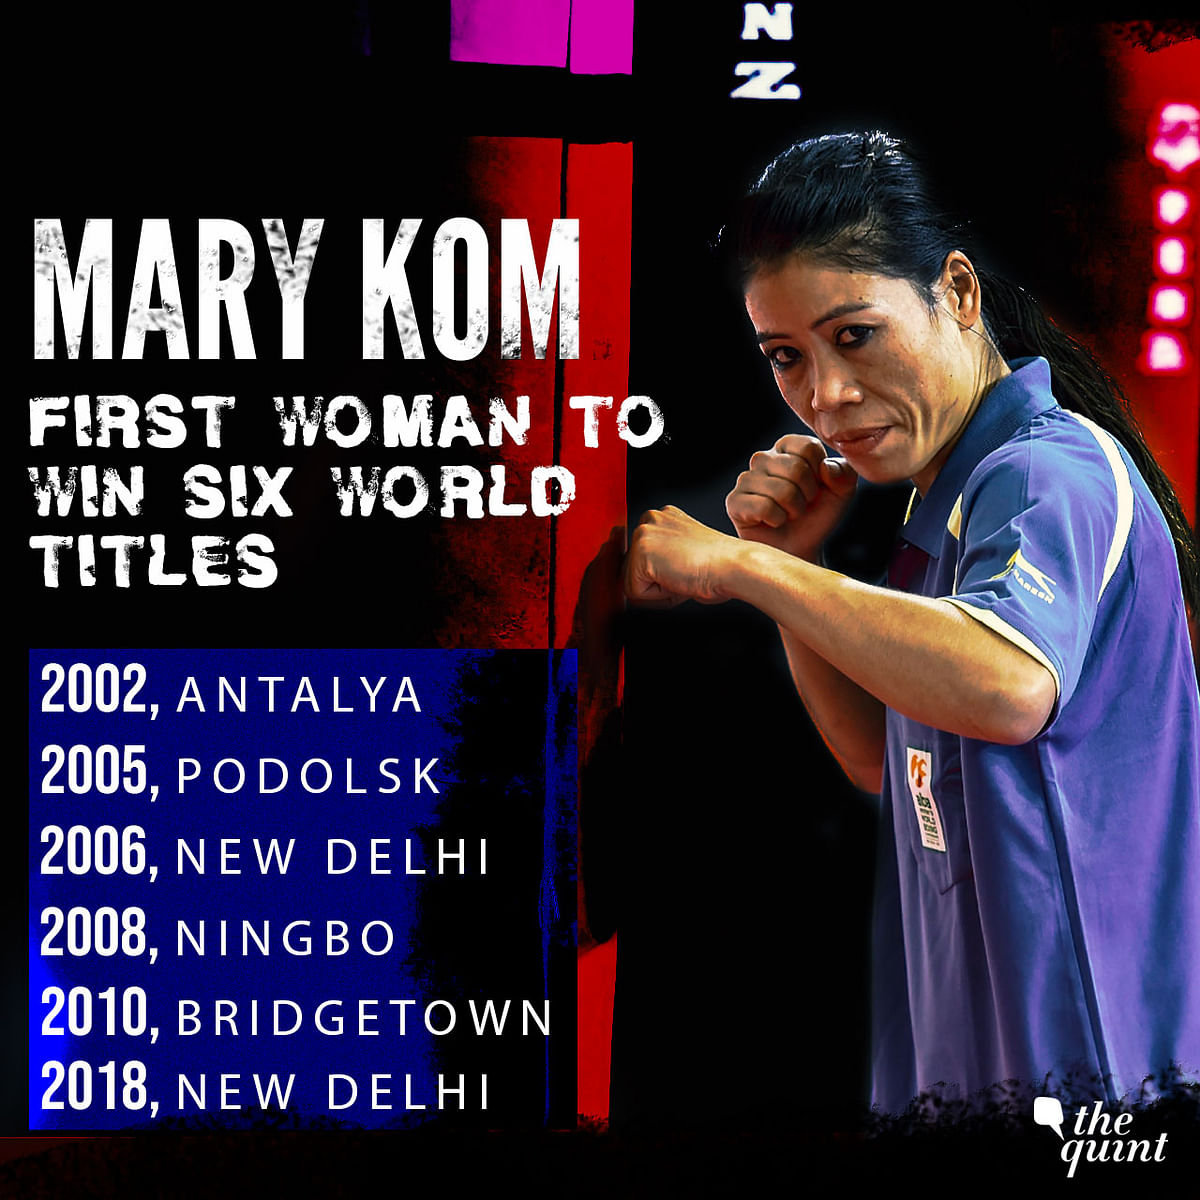 The Indian legend becomes the first female boxer – and only the second pugilist ever – to win six world titles.